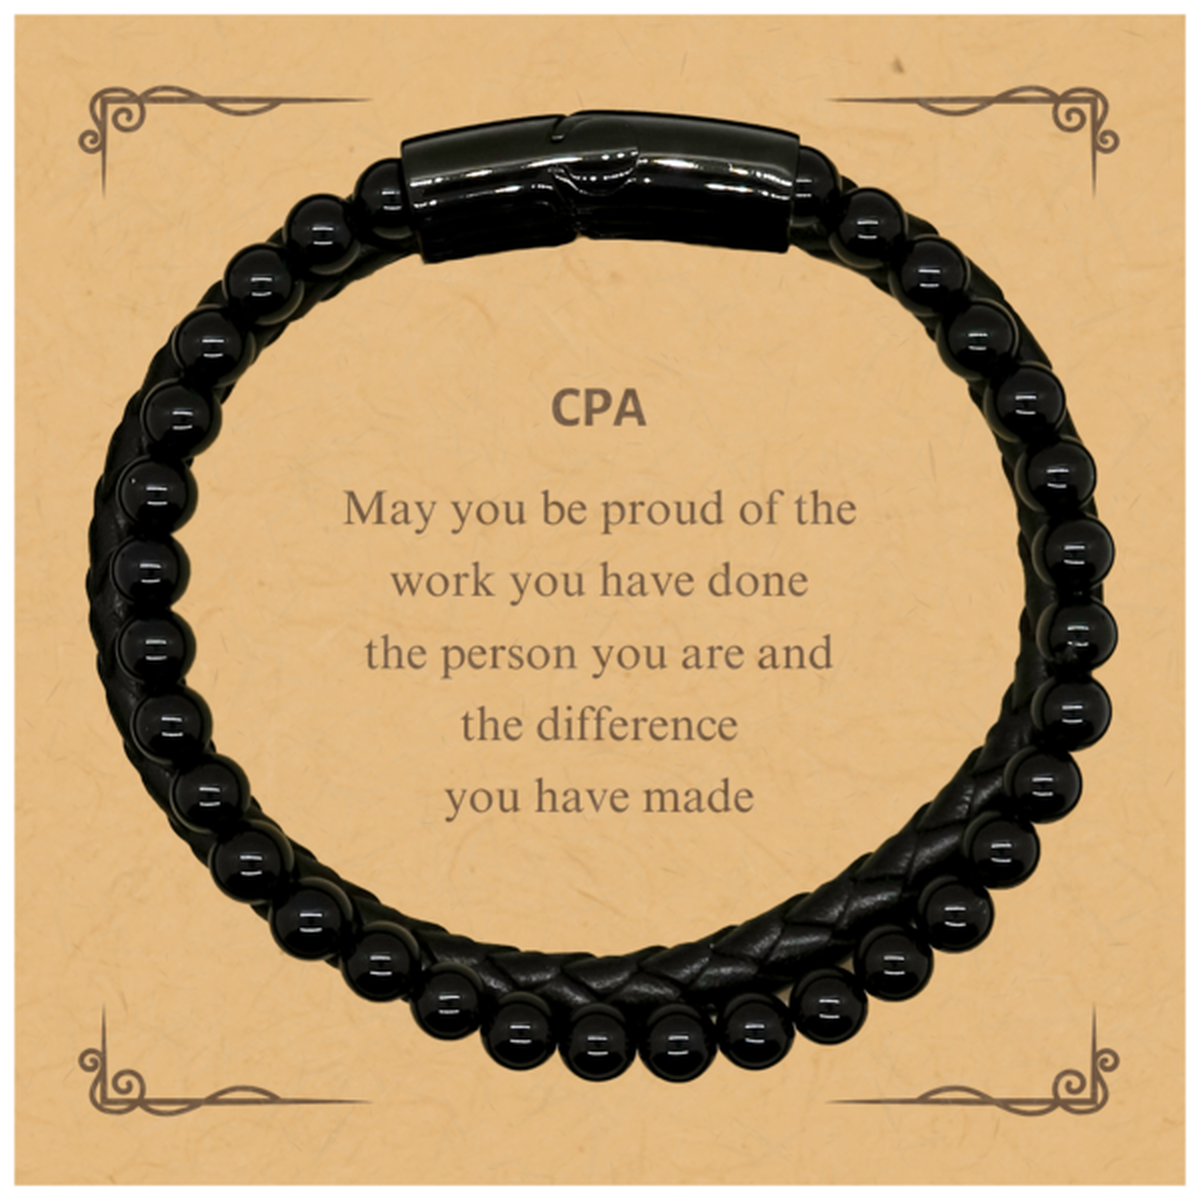 CPA May you be proud of the work you have done, Retirement CPA Stone Leather Bracelets for Colleague Appreciation Gifts Amazing for CPA